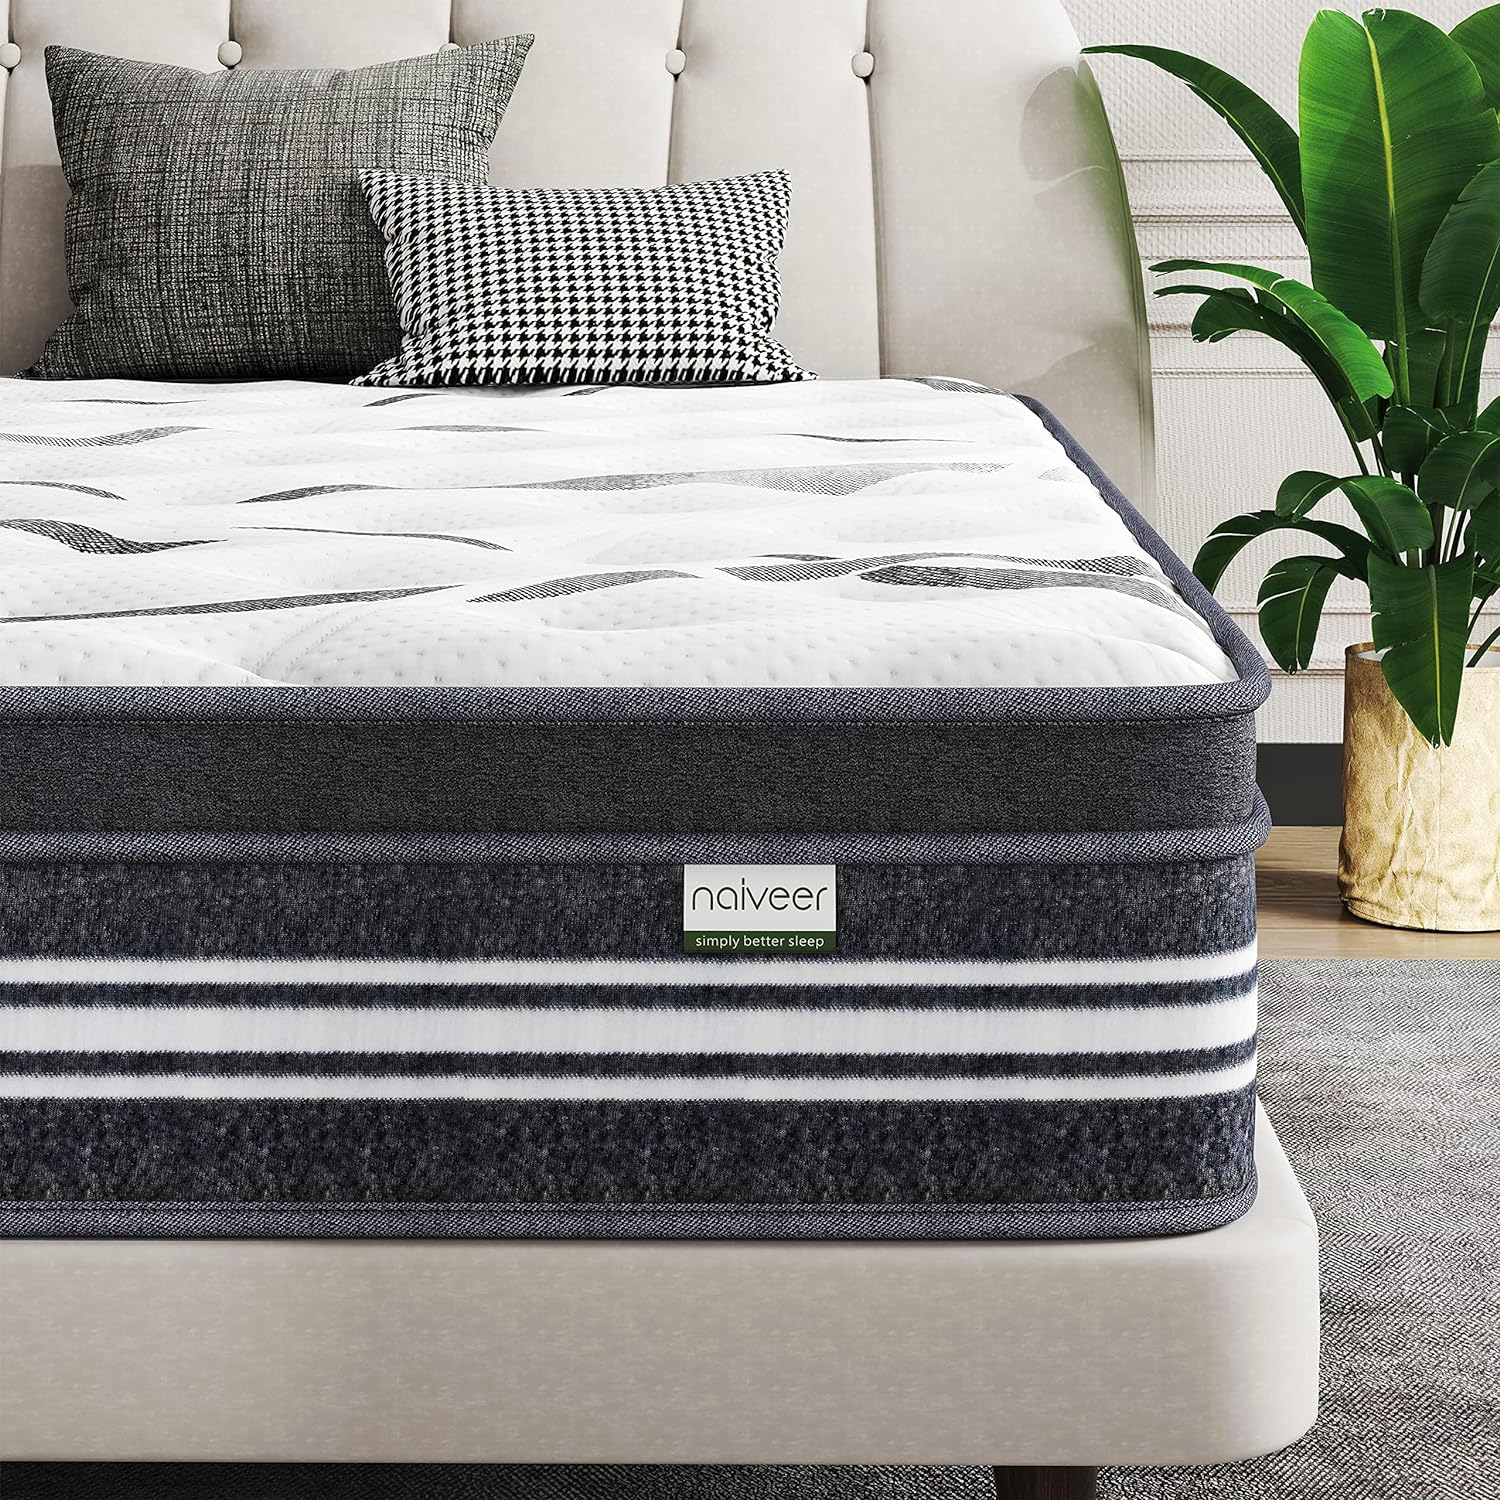 Best Mattress for Overweight People: Top Choices for Supportive Sleep